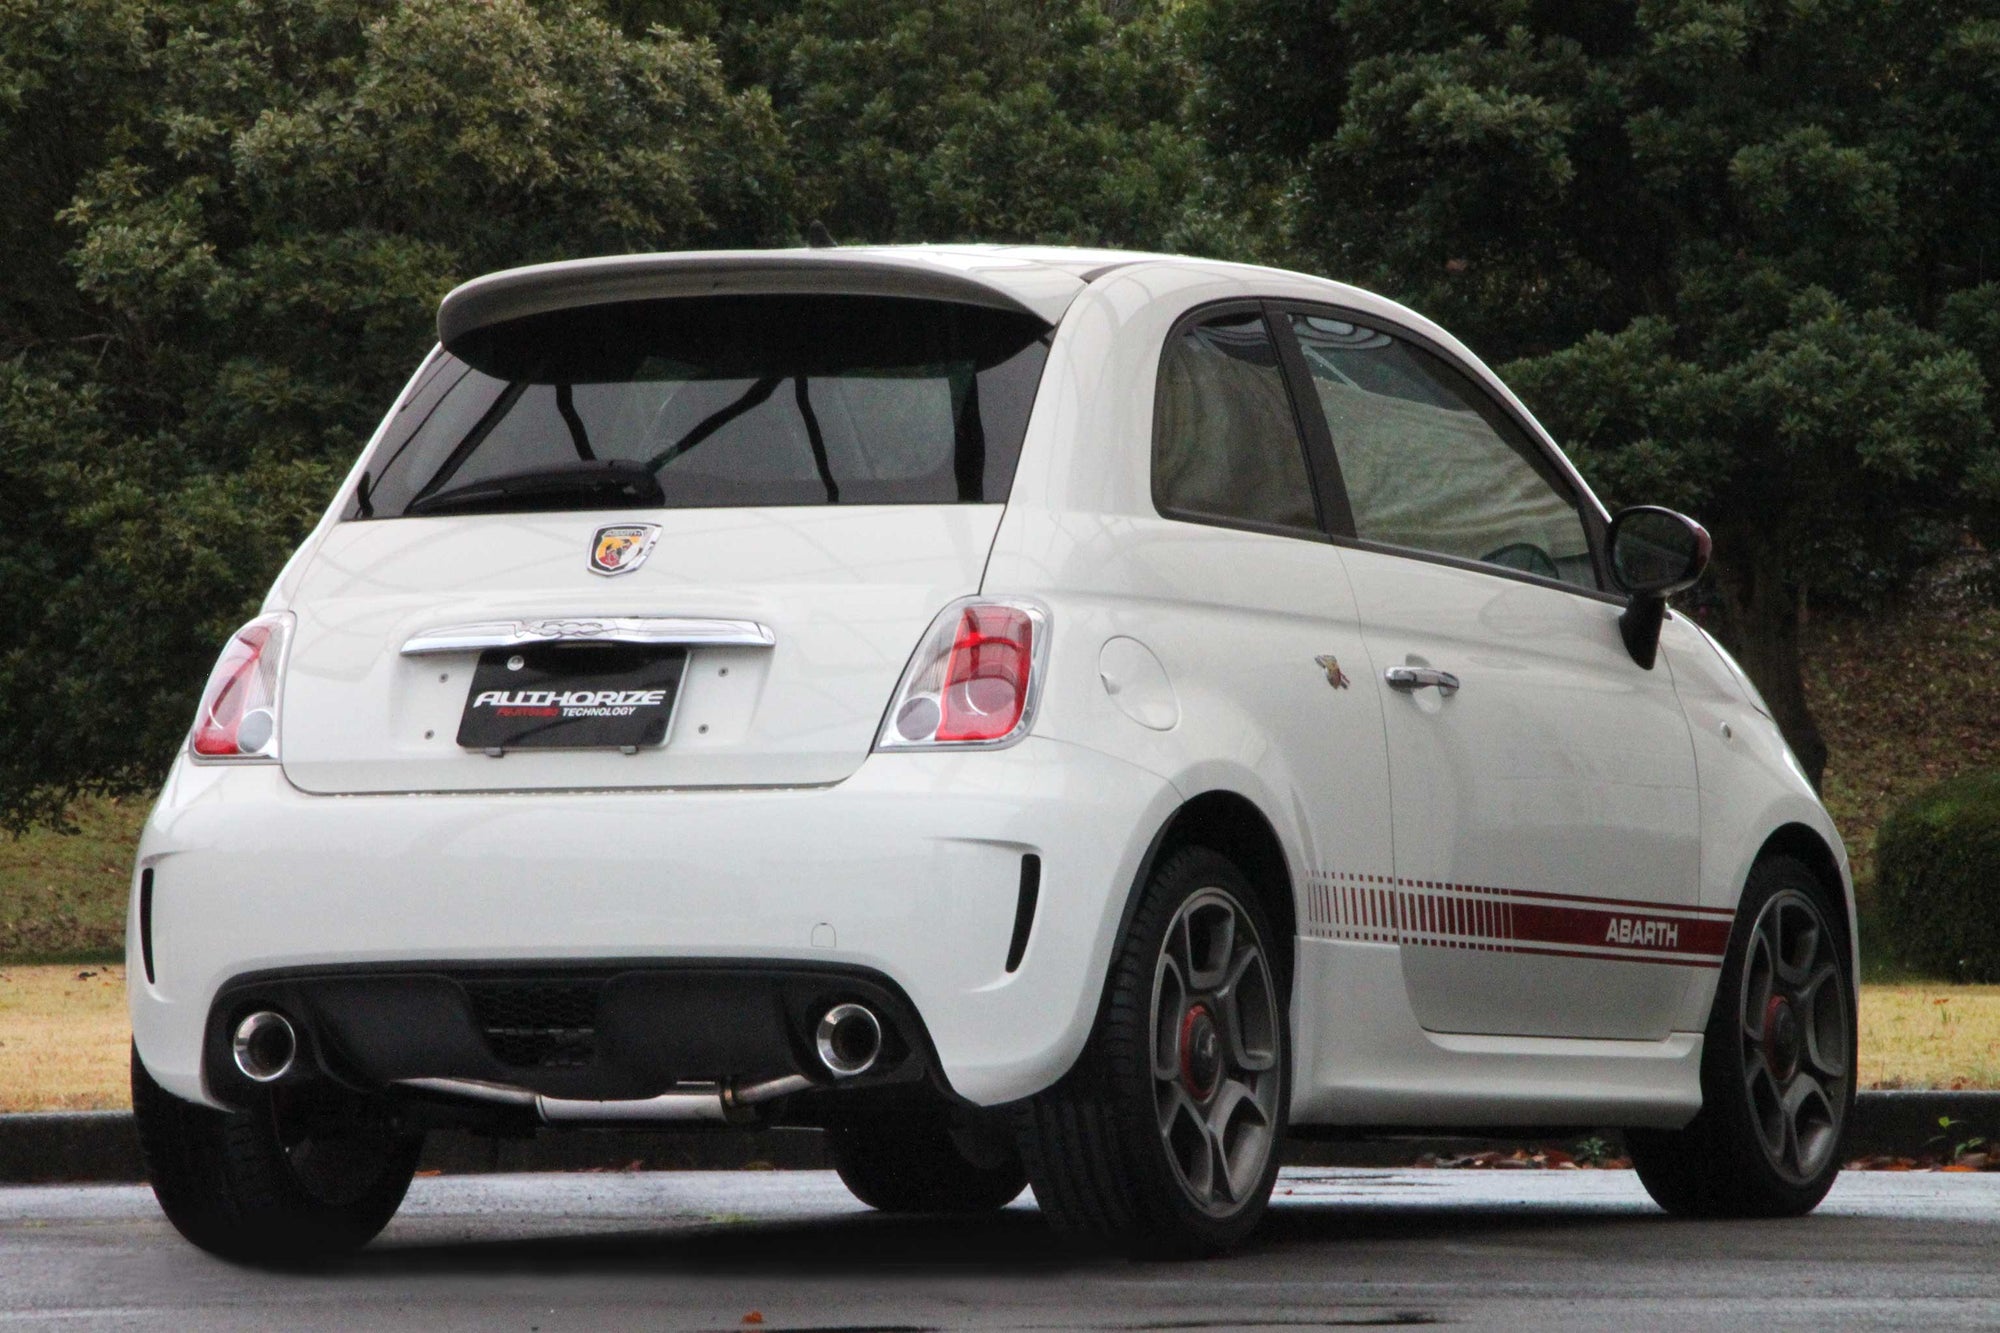 FUJITSUBO AUTHORIZE R Exhaust For ABARTH 500 550-94411